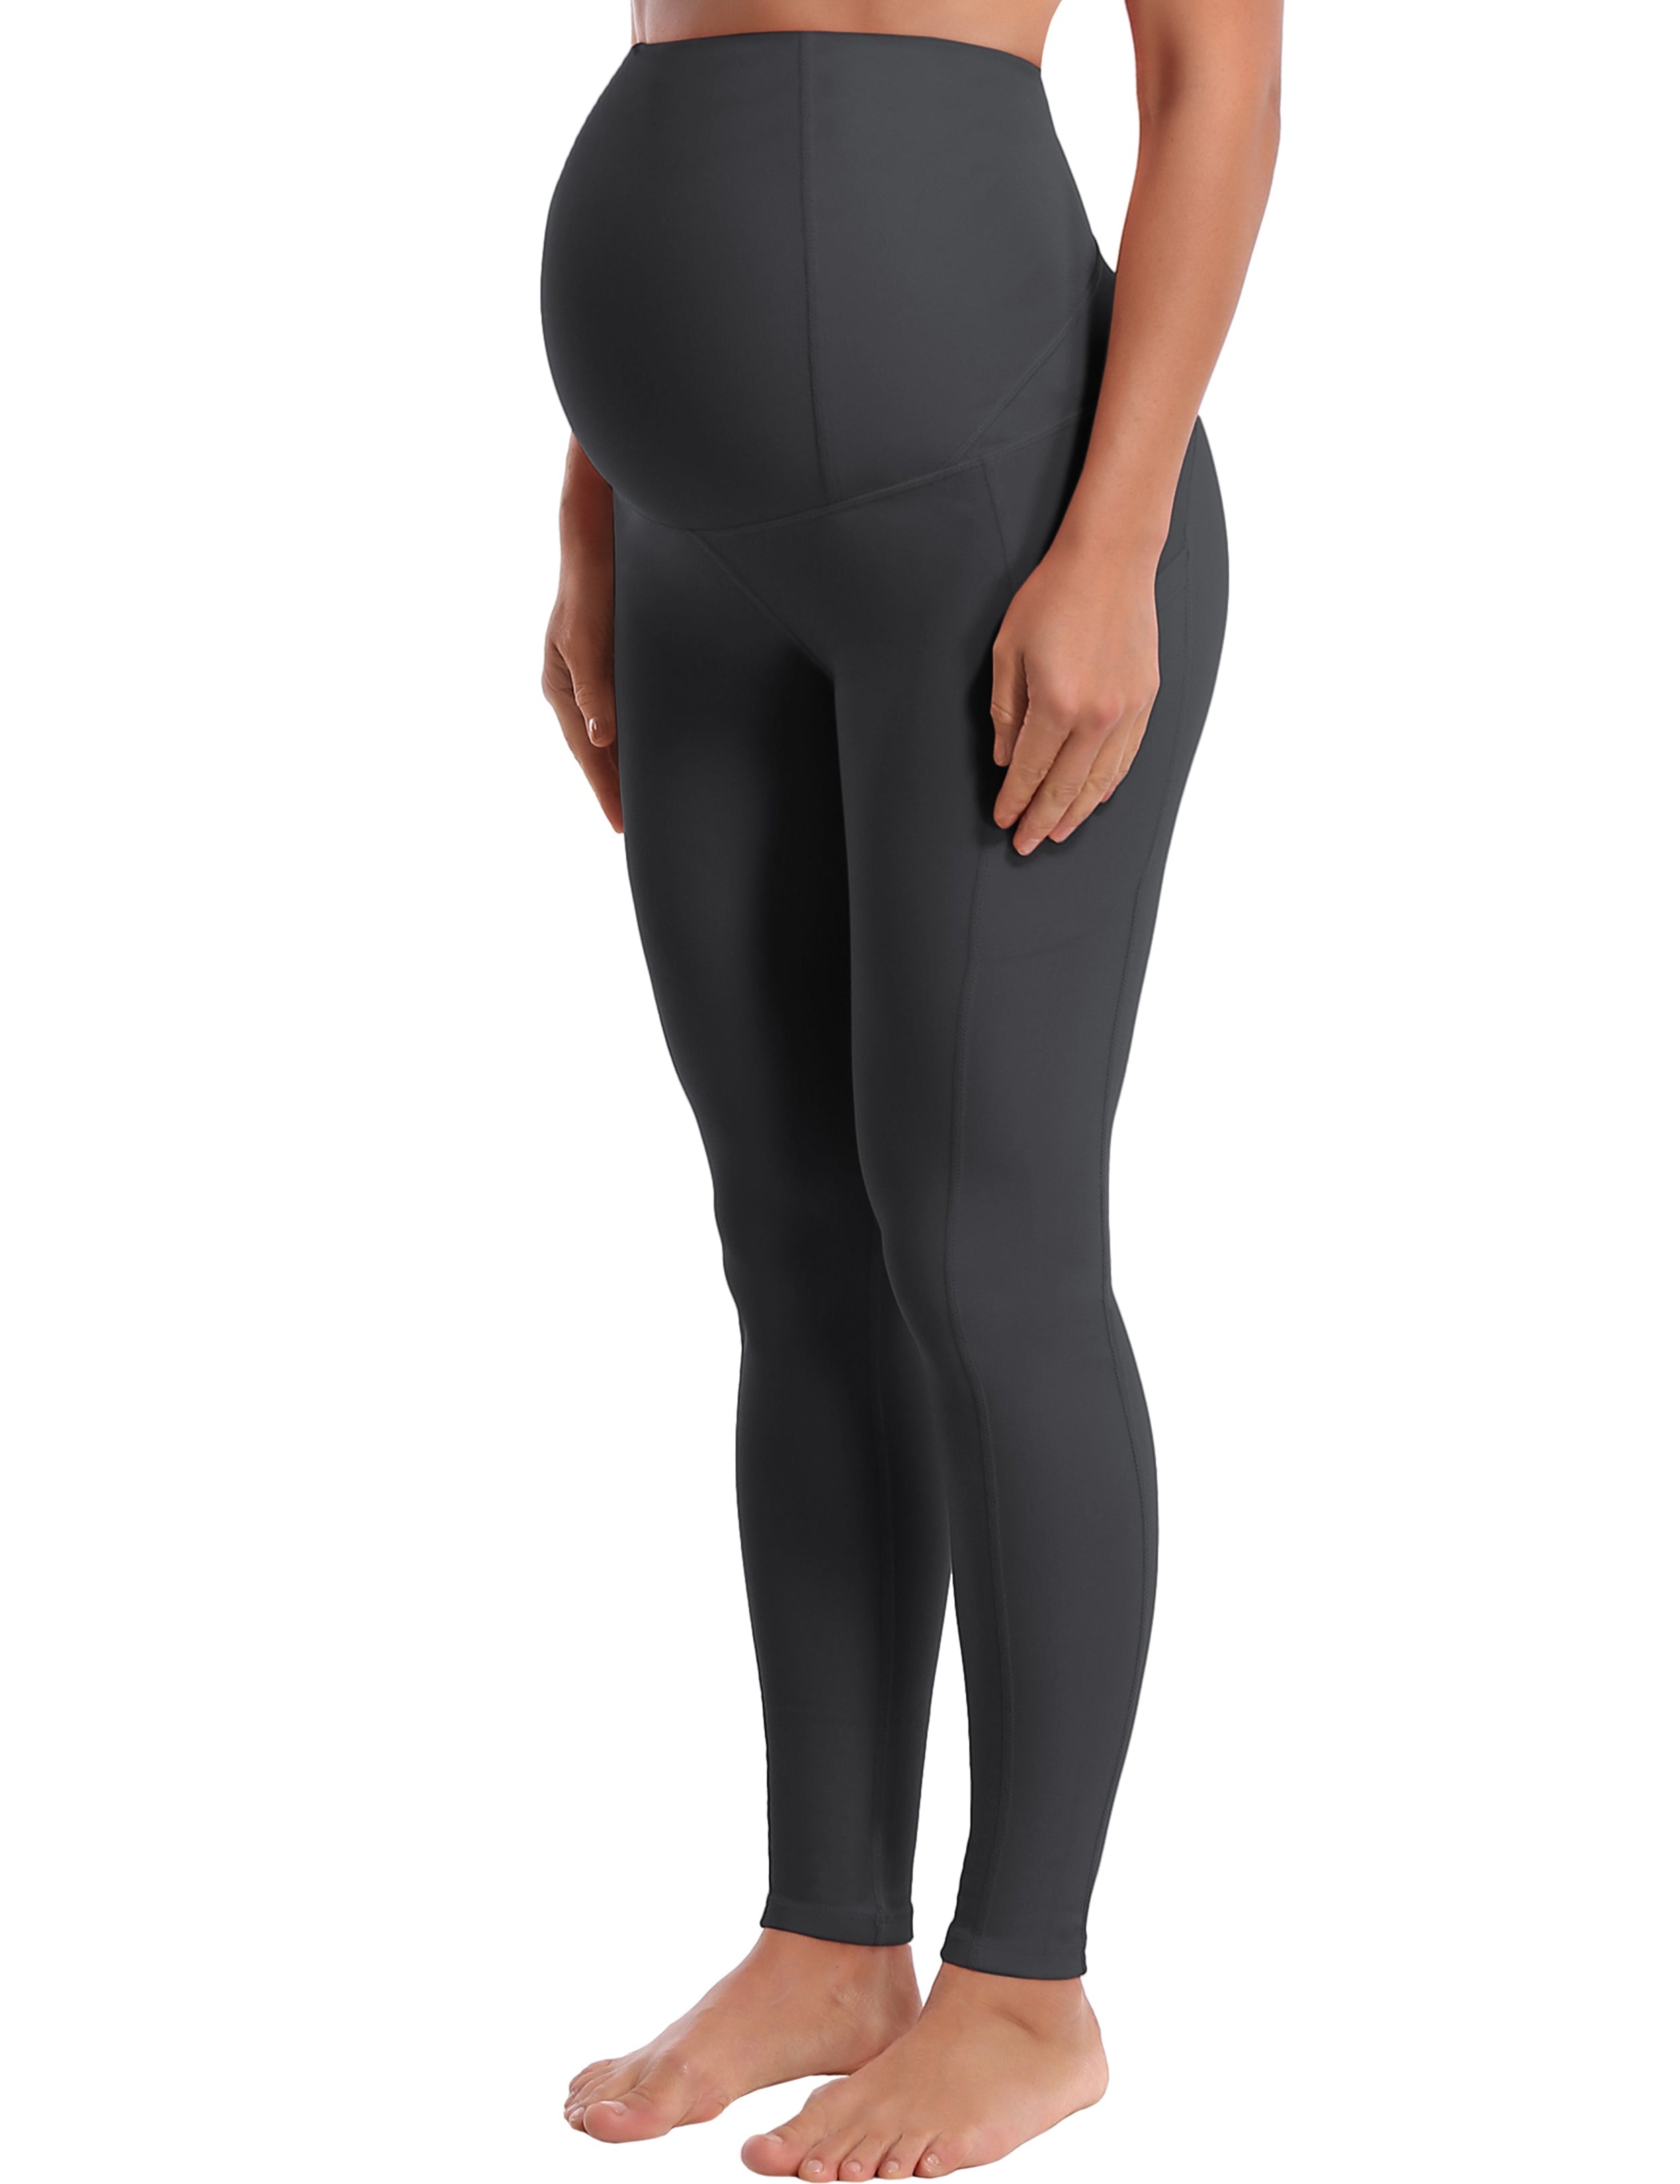 26" Side Pockets Maternity Tall Size Pants shadowcharcoal 87%Nylon/13%Spandex Softest-ever fabric High elasticity 4-way stretch Fabric doesn't attract lint easily No see-through Moisture-wicking Machine wash